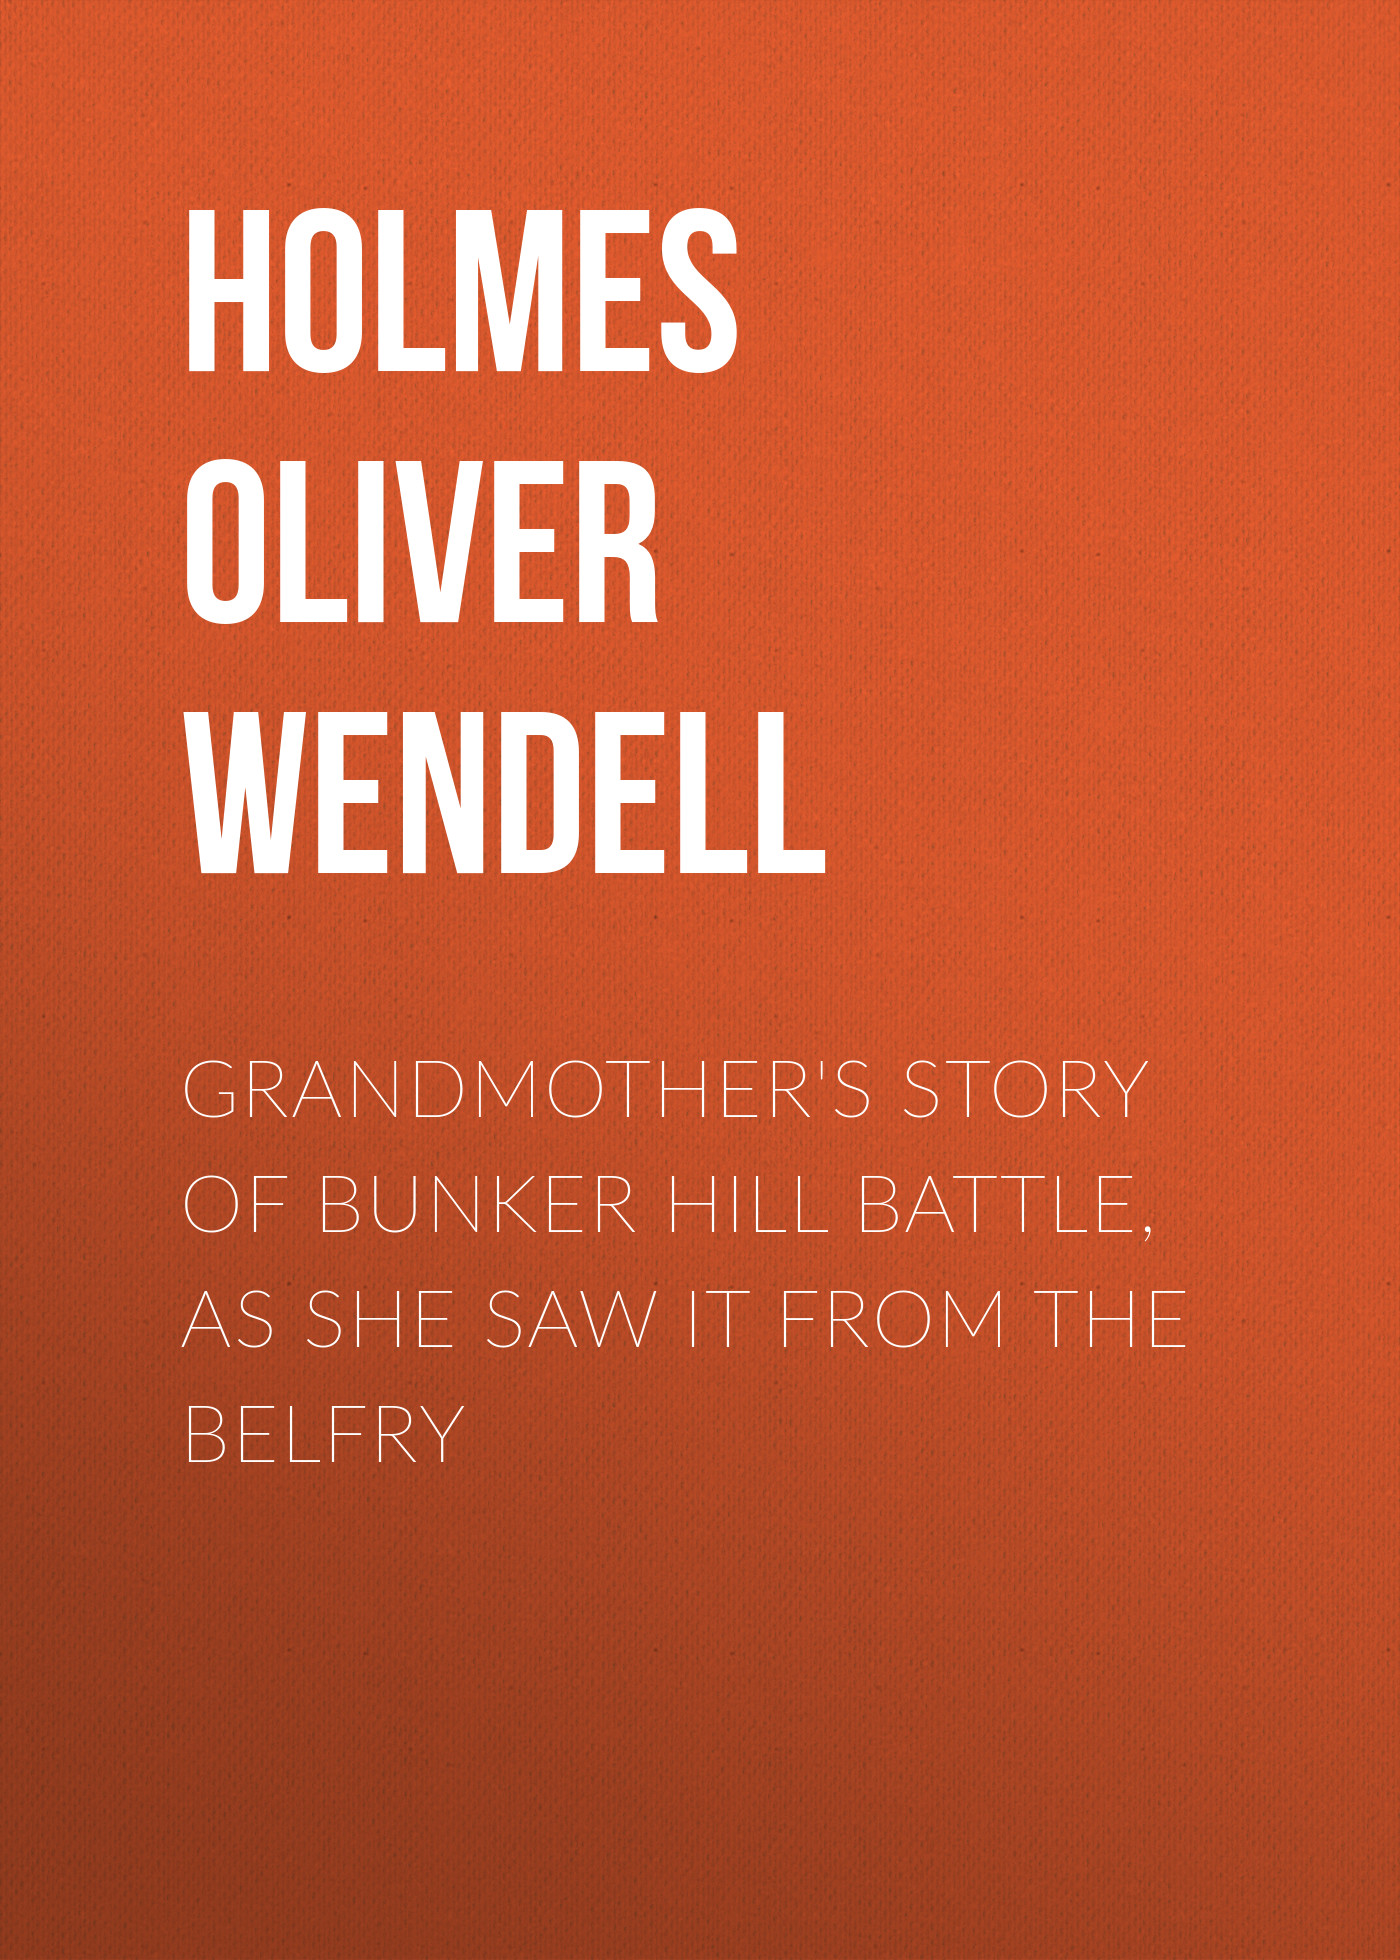 Grandmother's Story of Bunker Hill Battle, as She Saw it from the Belfry